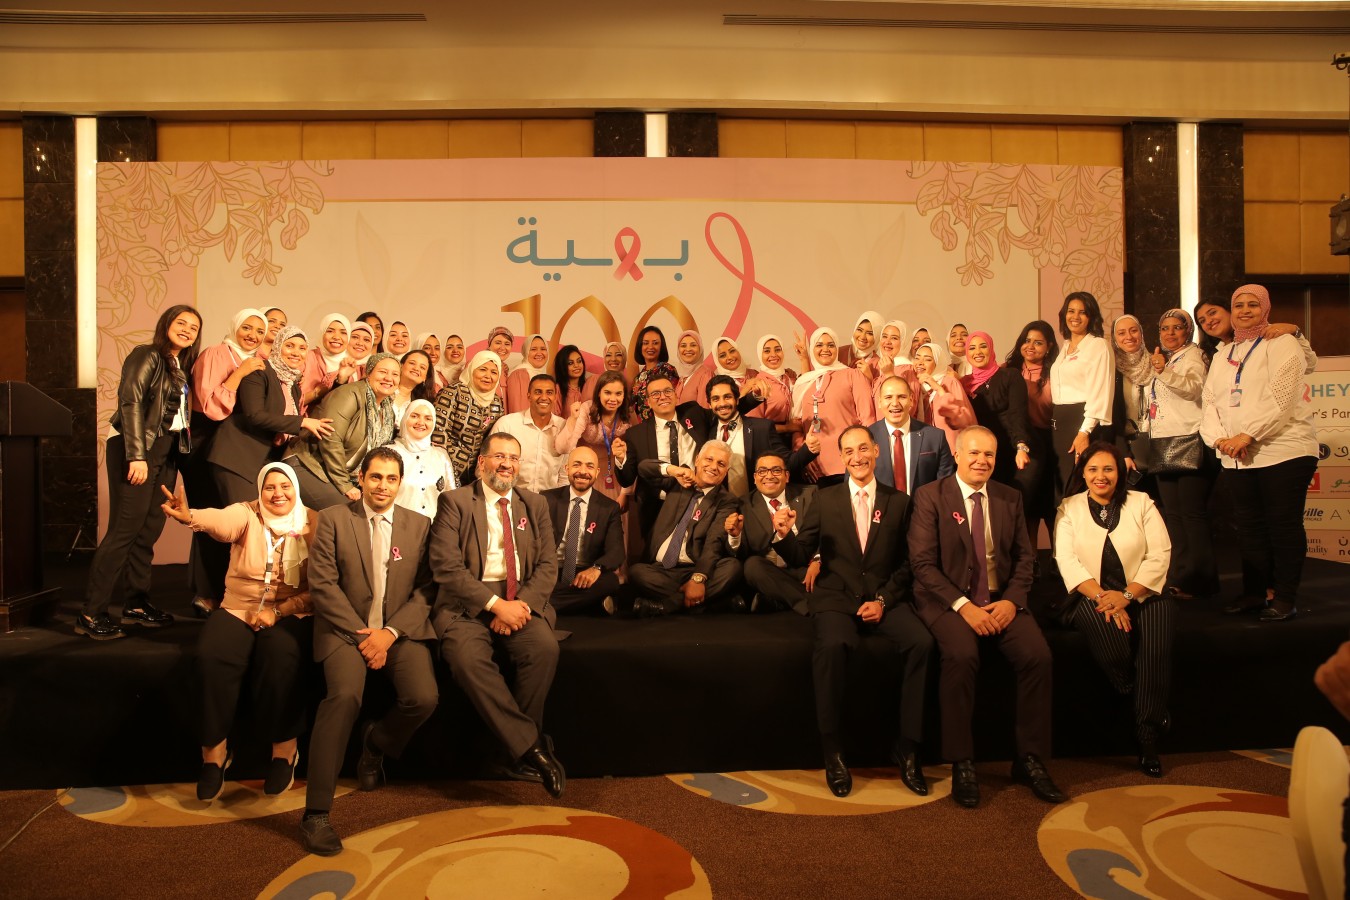 Baheya’s foundation is a nongovernmental organization for unpaid cancer breast treatment, it was opened four years ago, aiming at receiving 10000 women per year